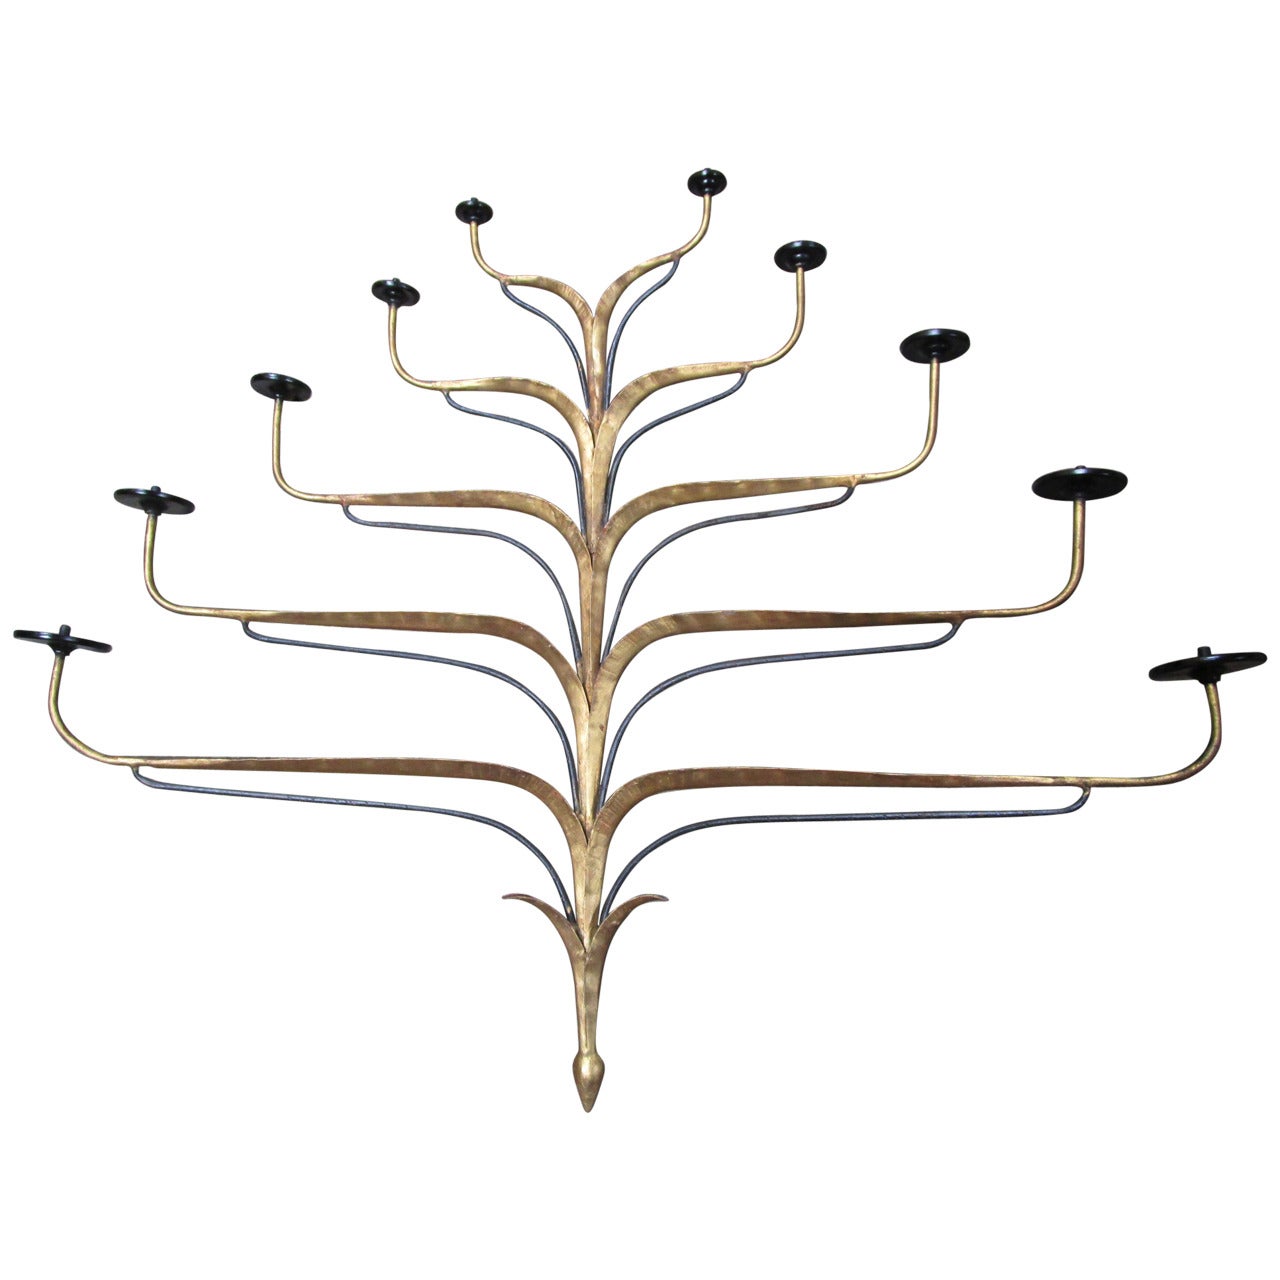 Gilt Candelabra Sconce with Ten Candle Arms